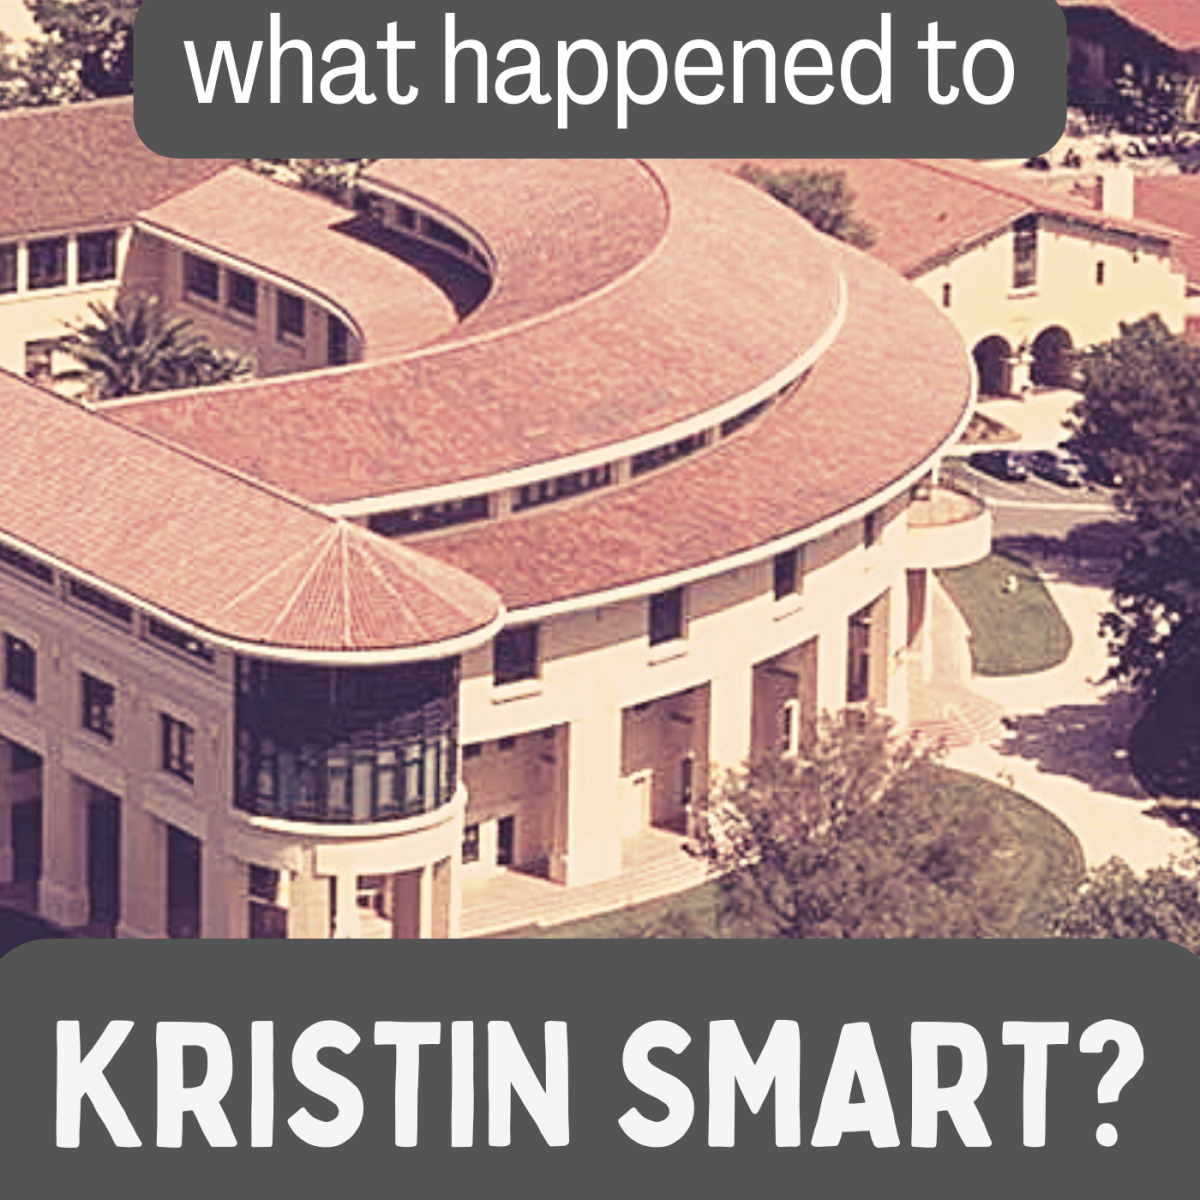 Kristin Smart was attending Cal Poly San Luis Obispo when she disappeared.